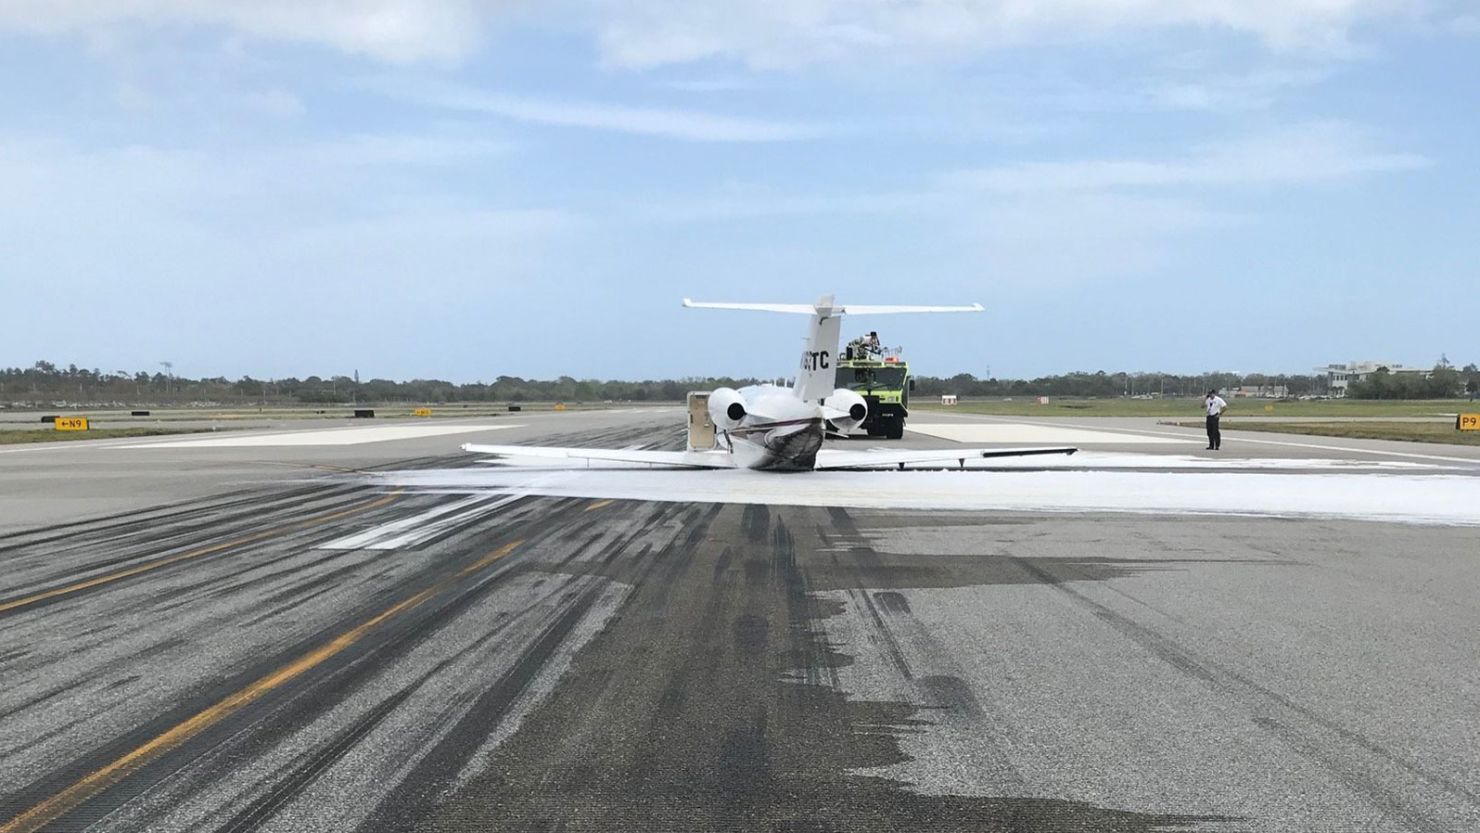 Emergency responders sprayed white foam to suppress a fire after Thursday's belly landing.